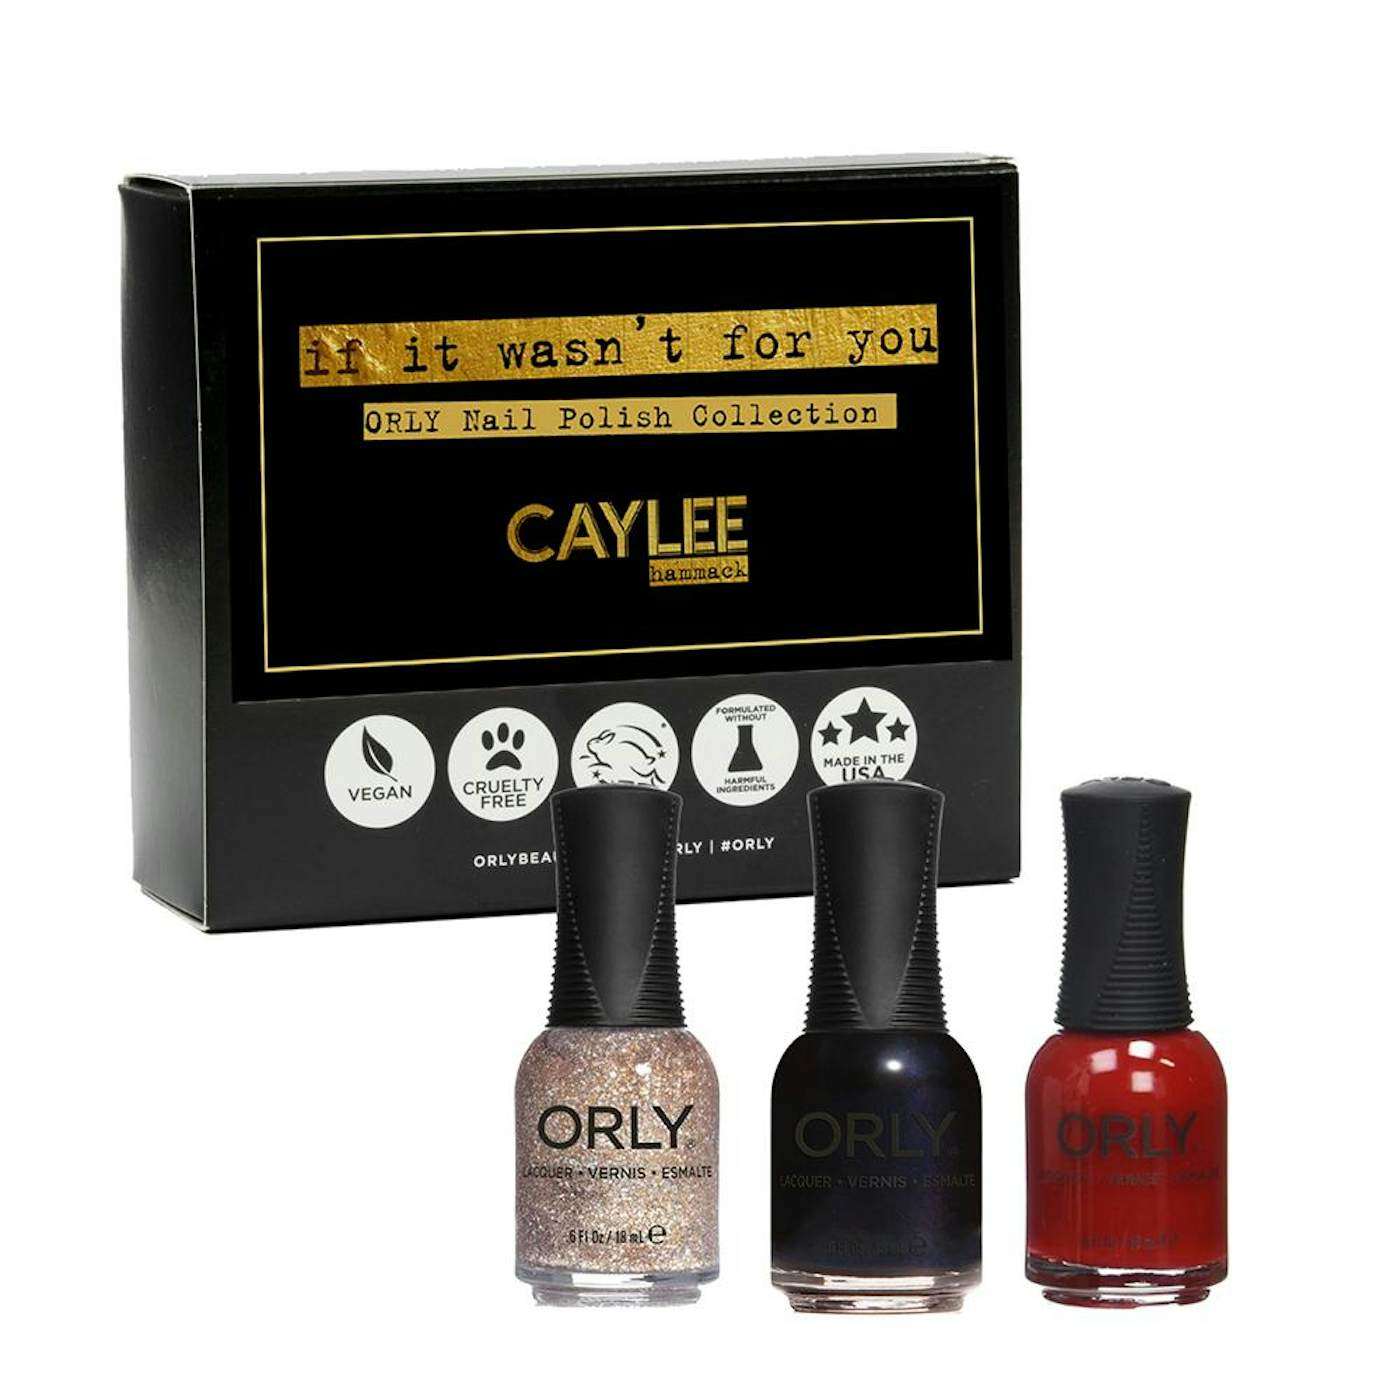 Caylee Hammack If It Wasn't For You Nail Polish Collection 2